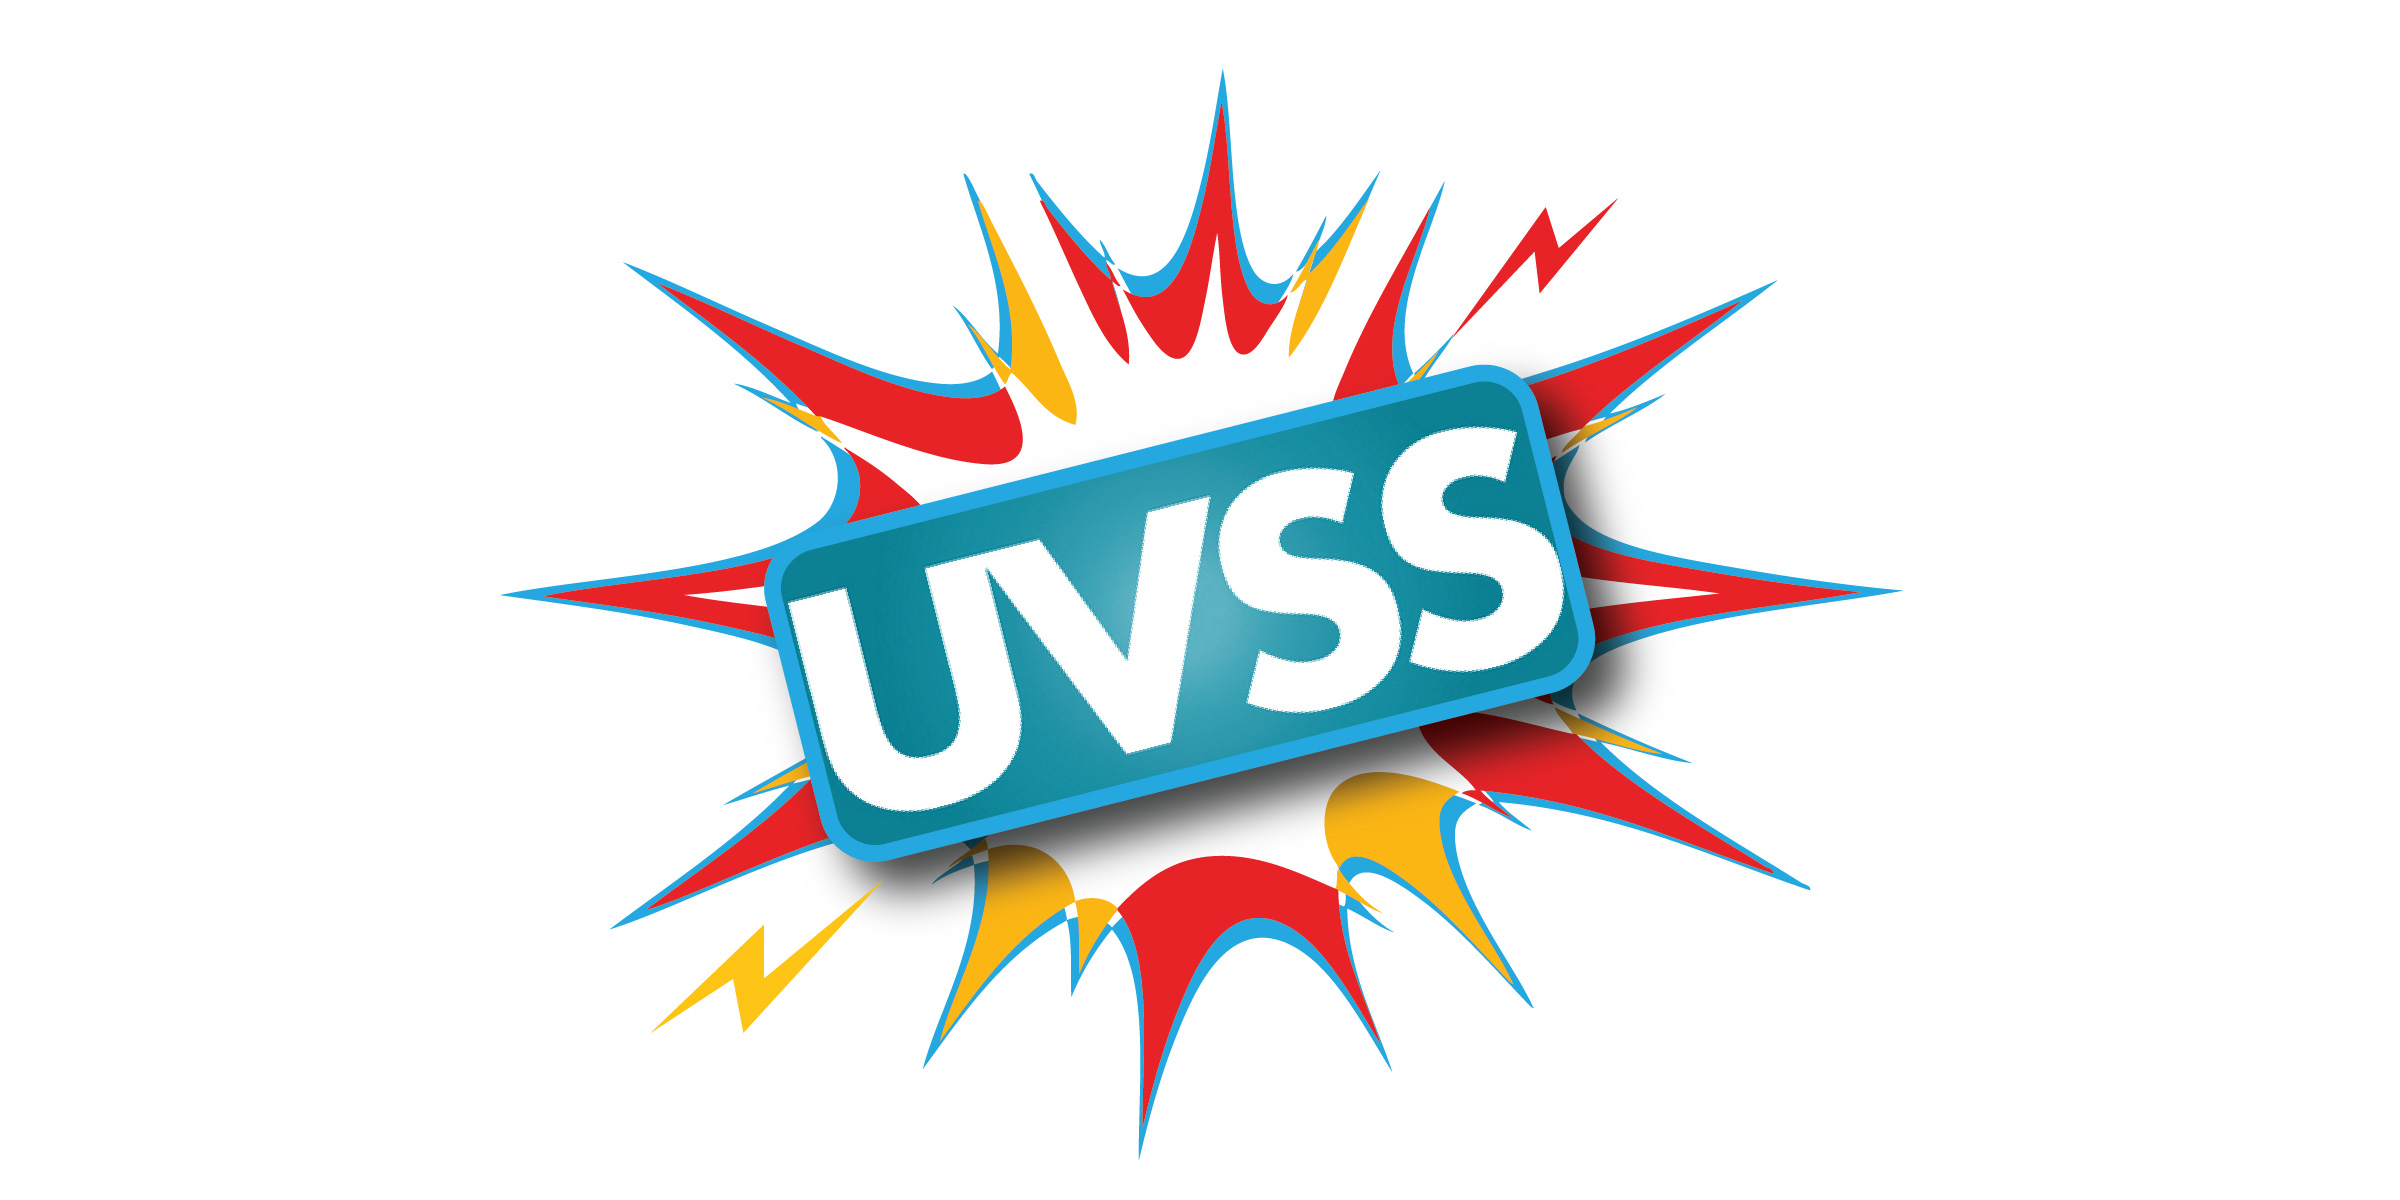 Three referenda in upcoming UVSS fall electoral event, but no in-person campaigning